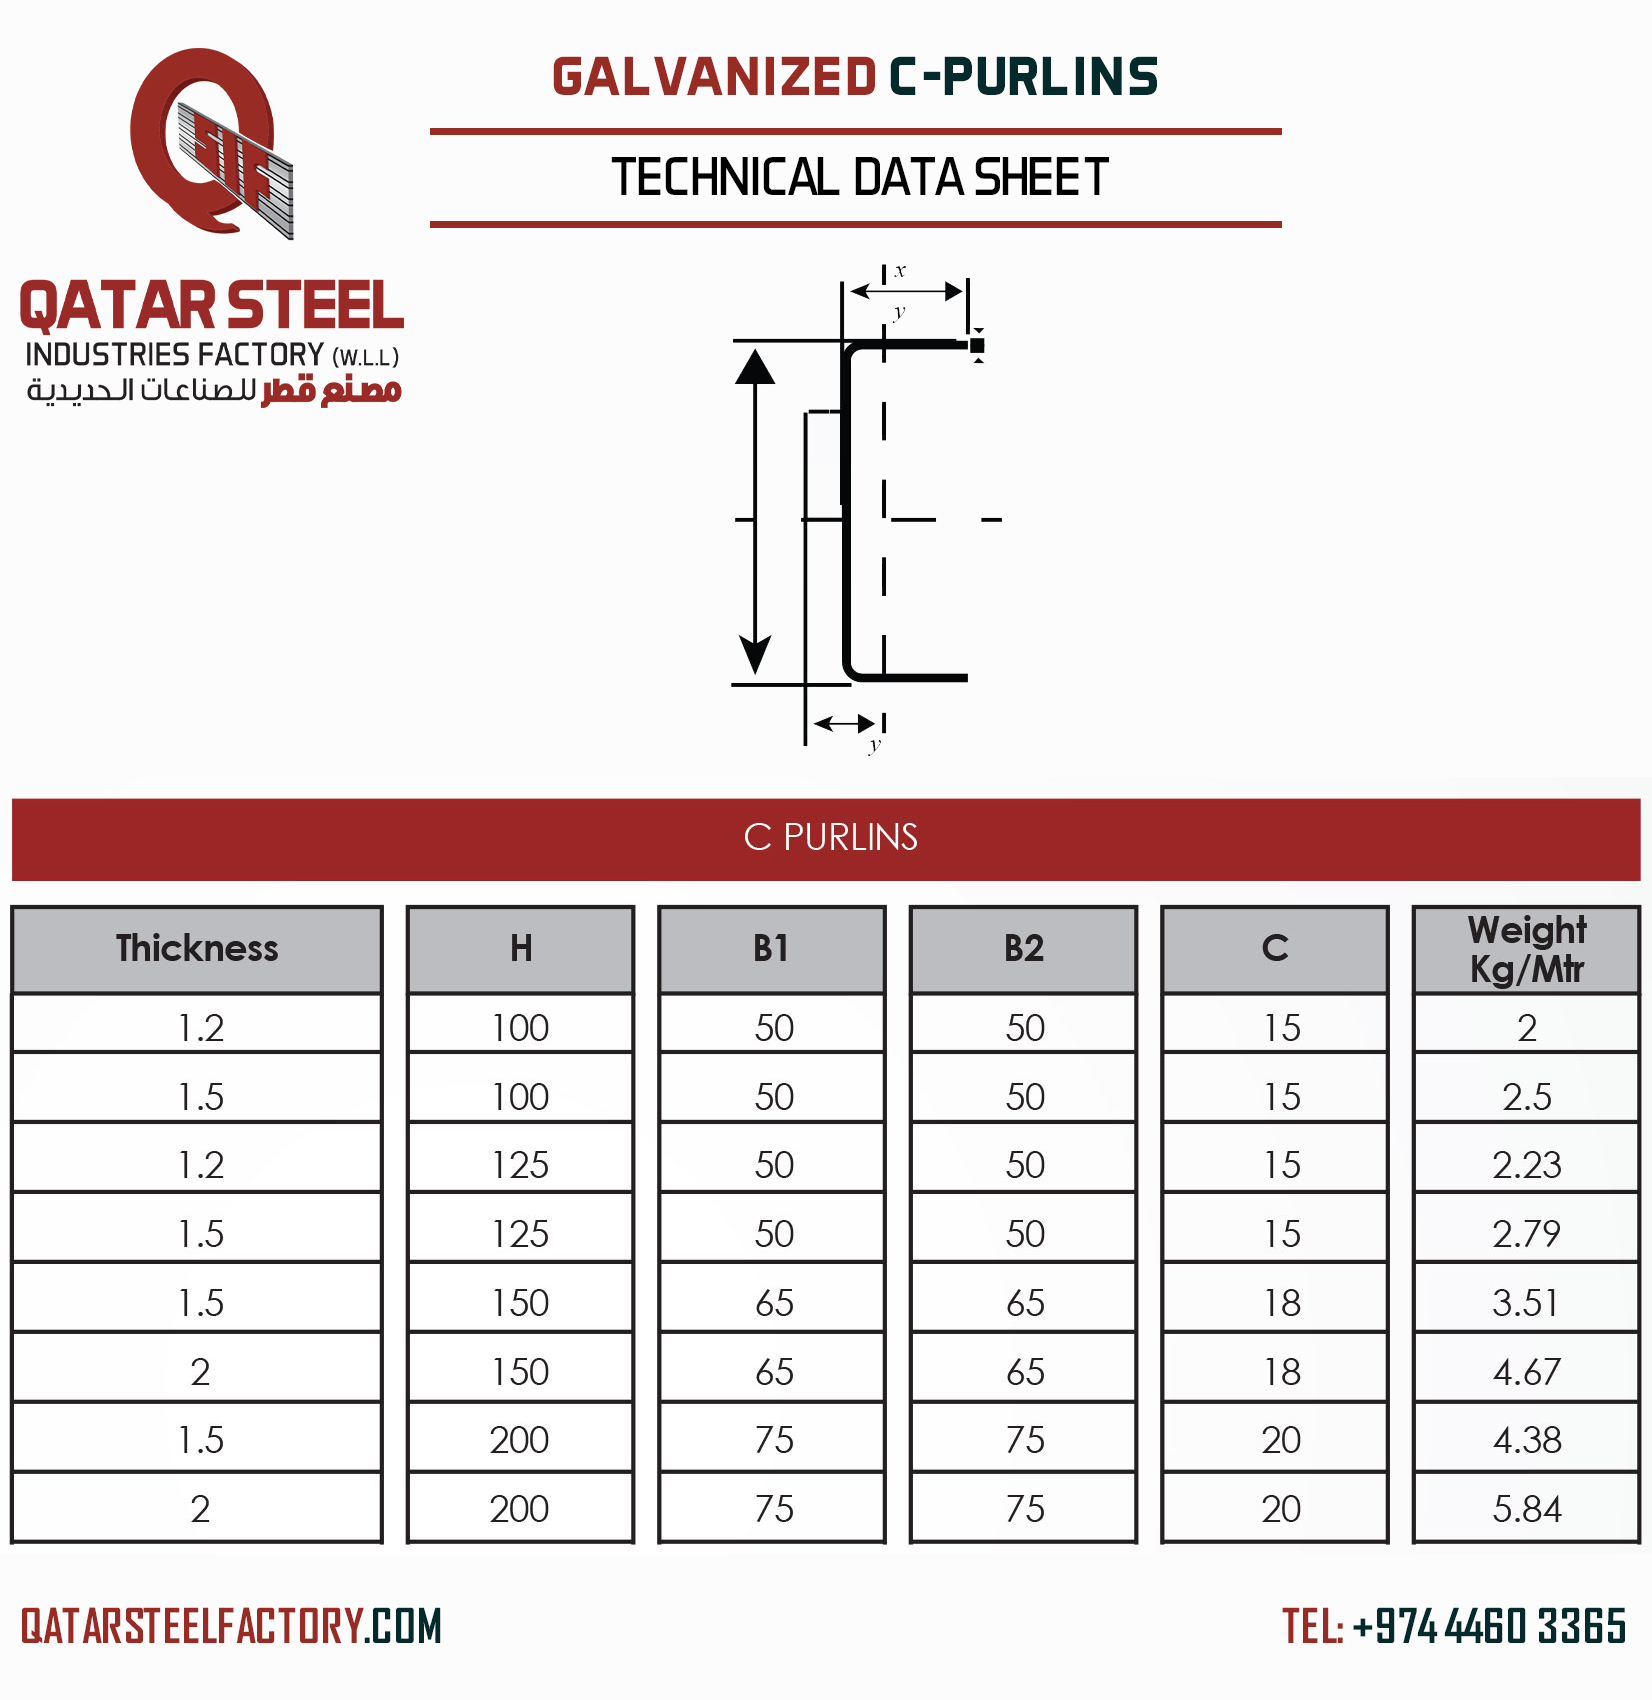 Manufacturing and Supplying Galvanized C Purlins in Qatar